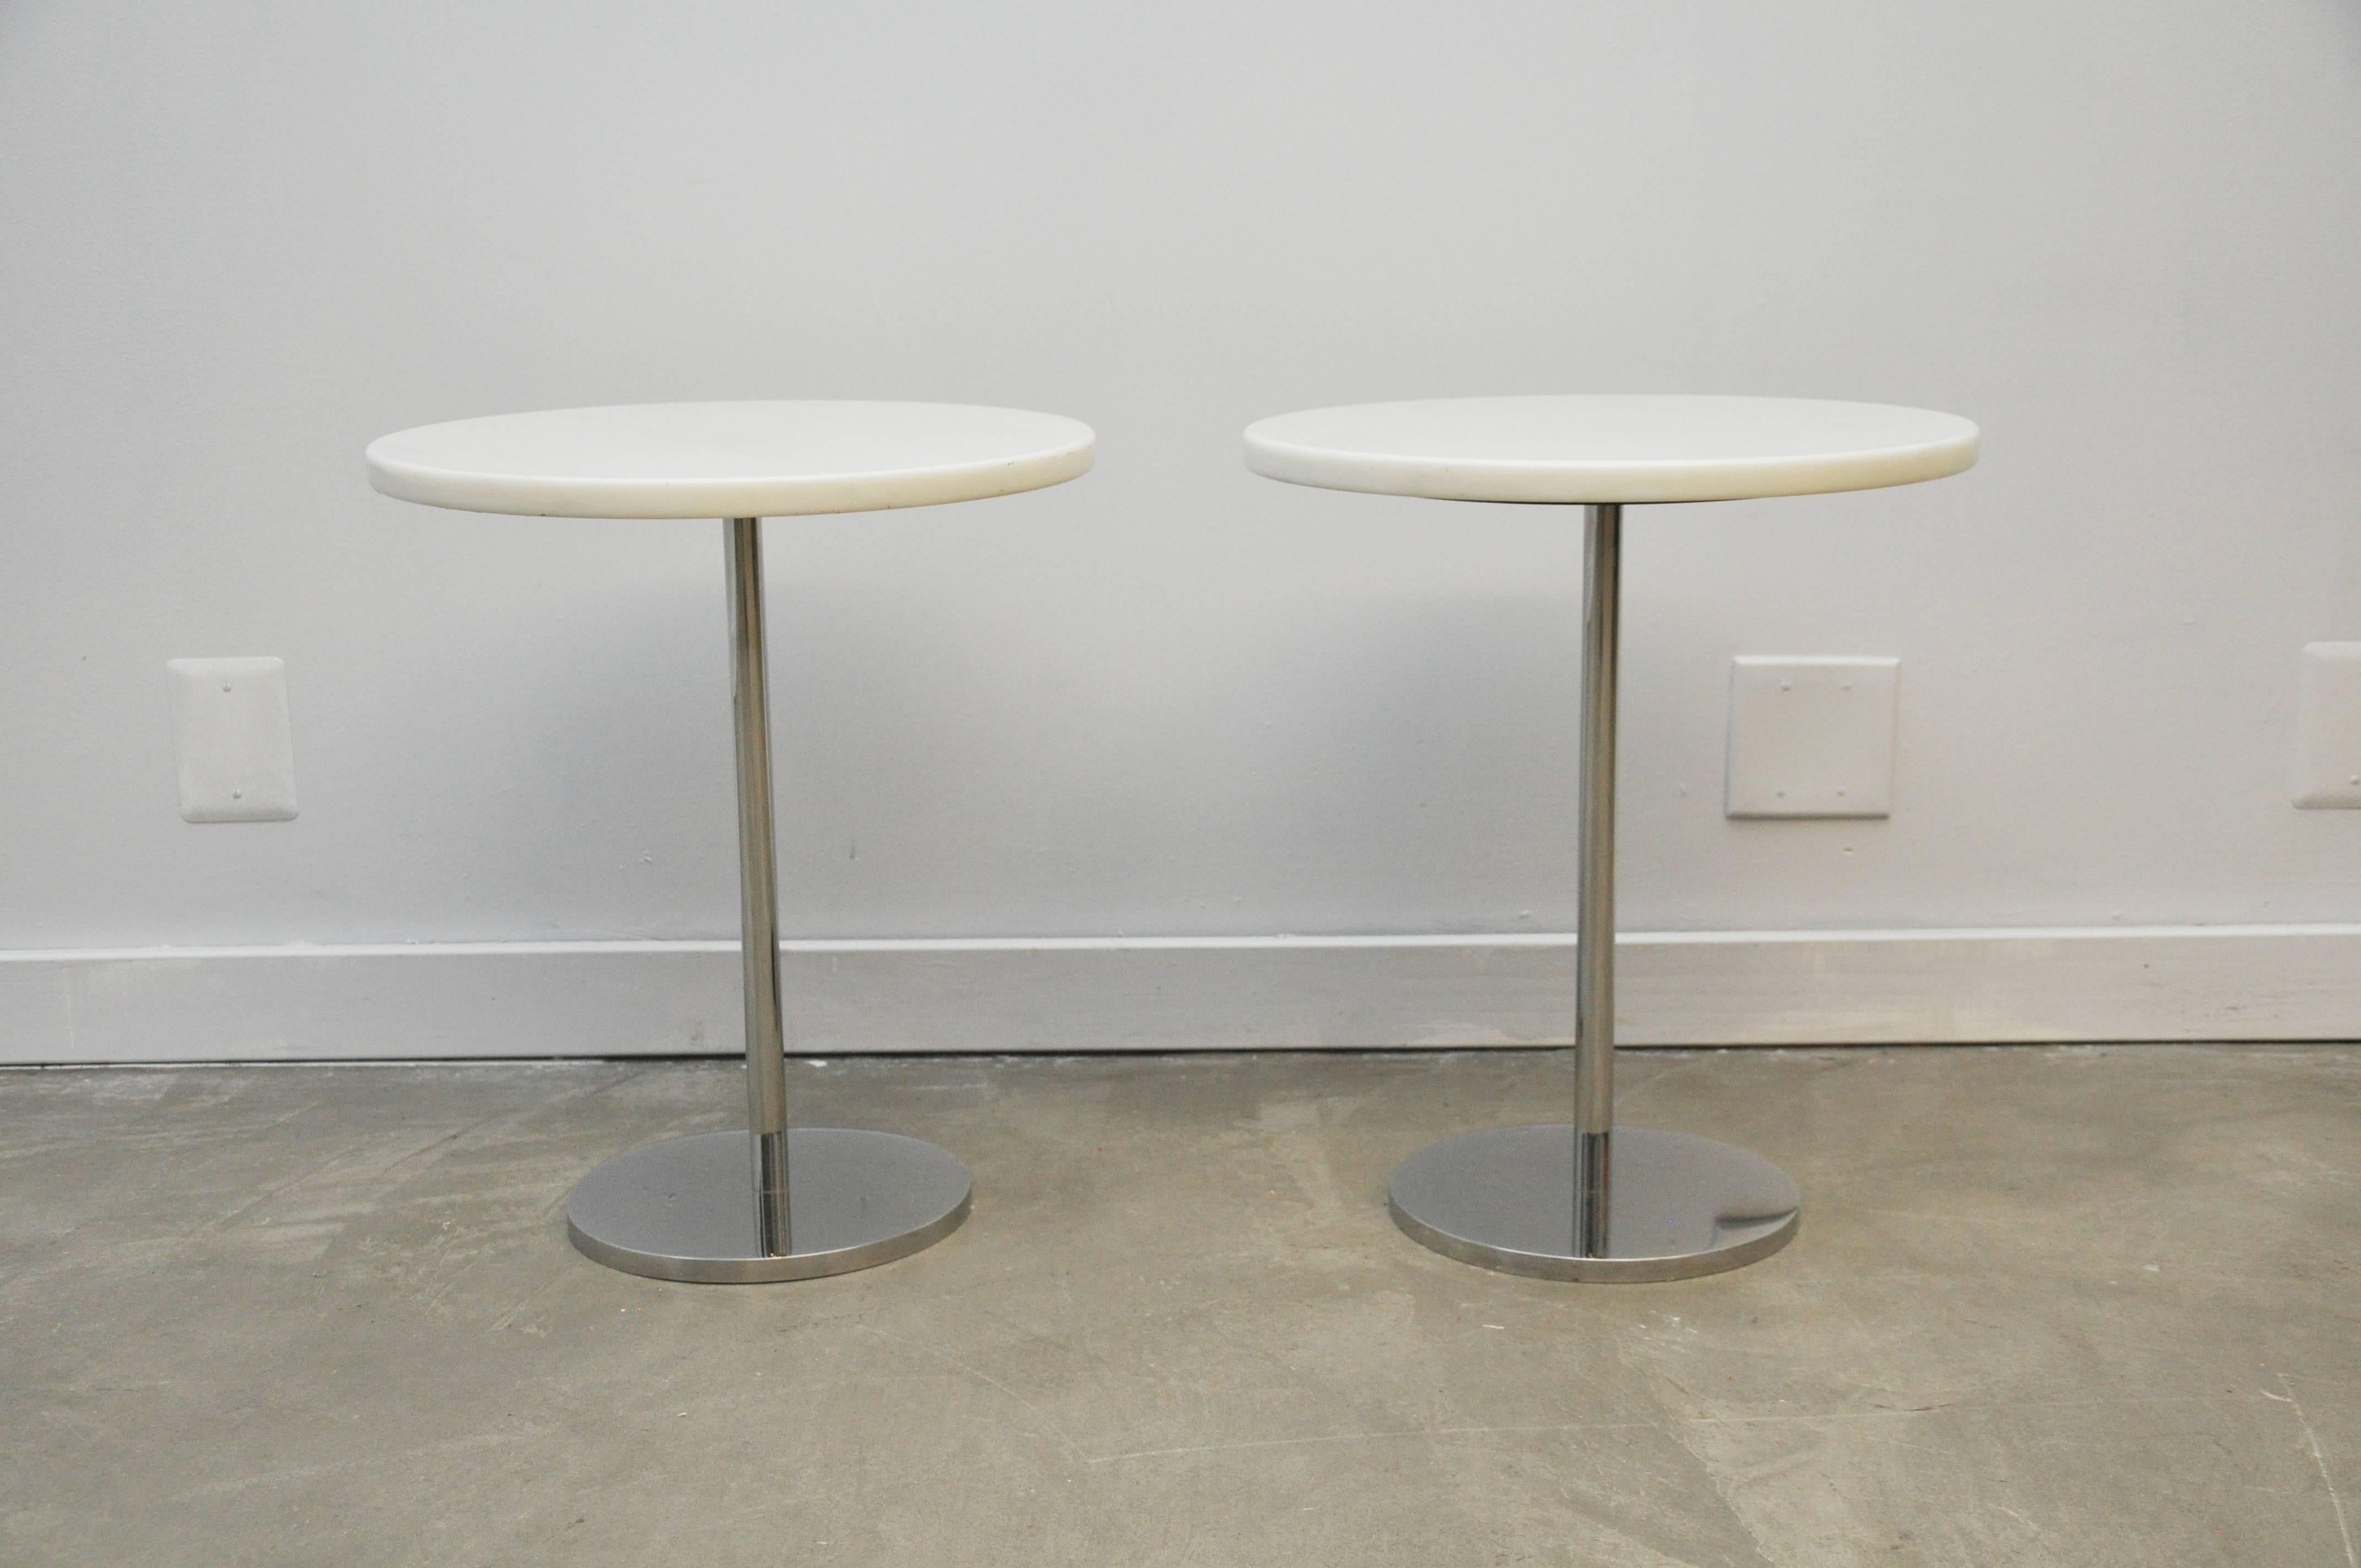 Pair of white marble side tables with polished stainless steel bases. Custom produced by Gerald R. Griffith Studio, circa 1970. Very heavy, top quality Minimalist design.